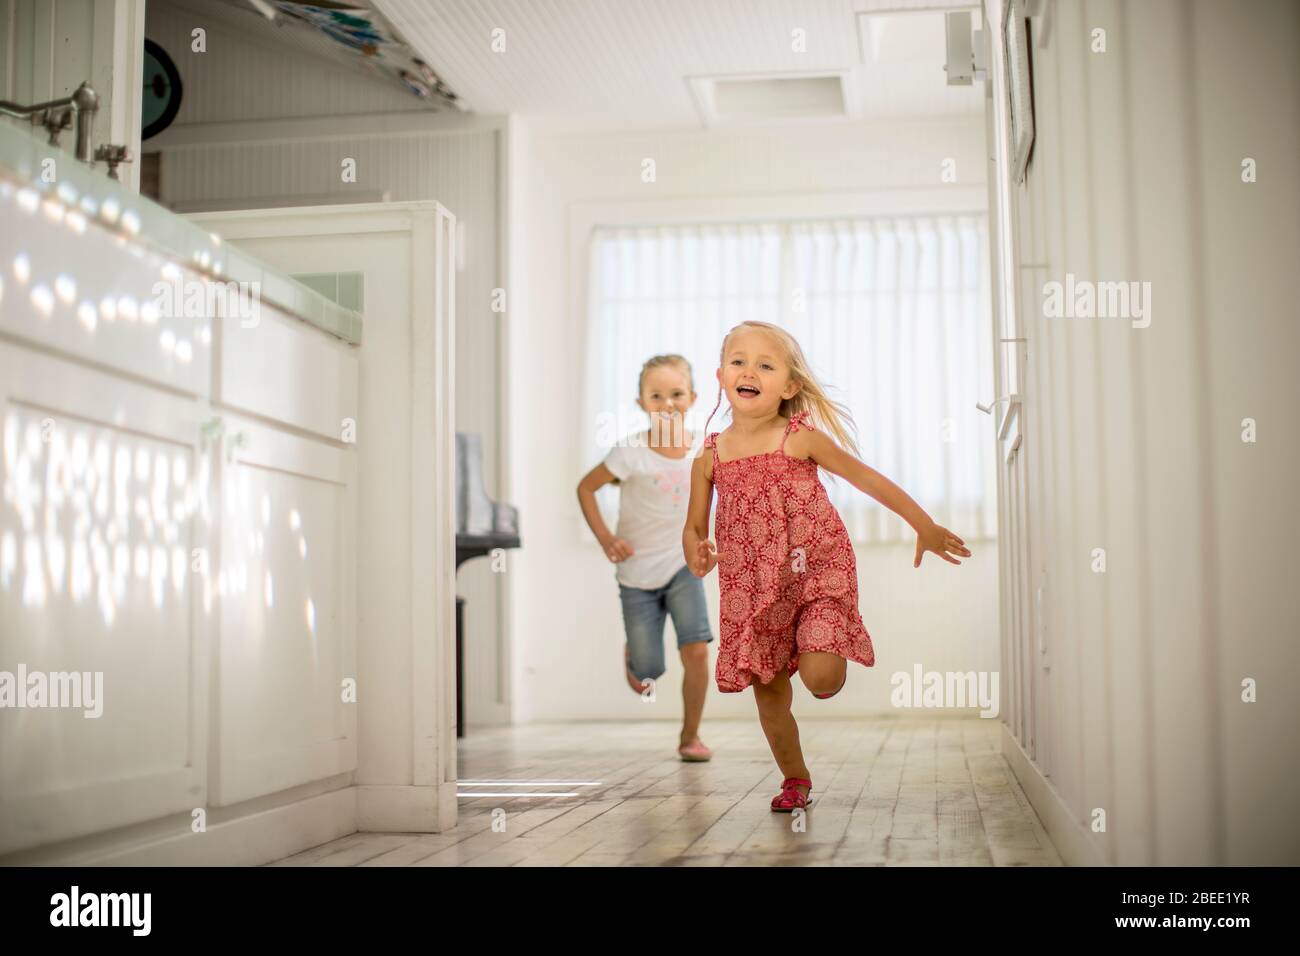 Two little girls have fun running through the house together Stock Photo